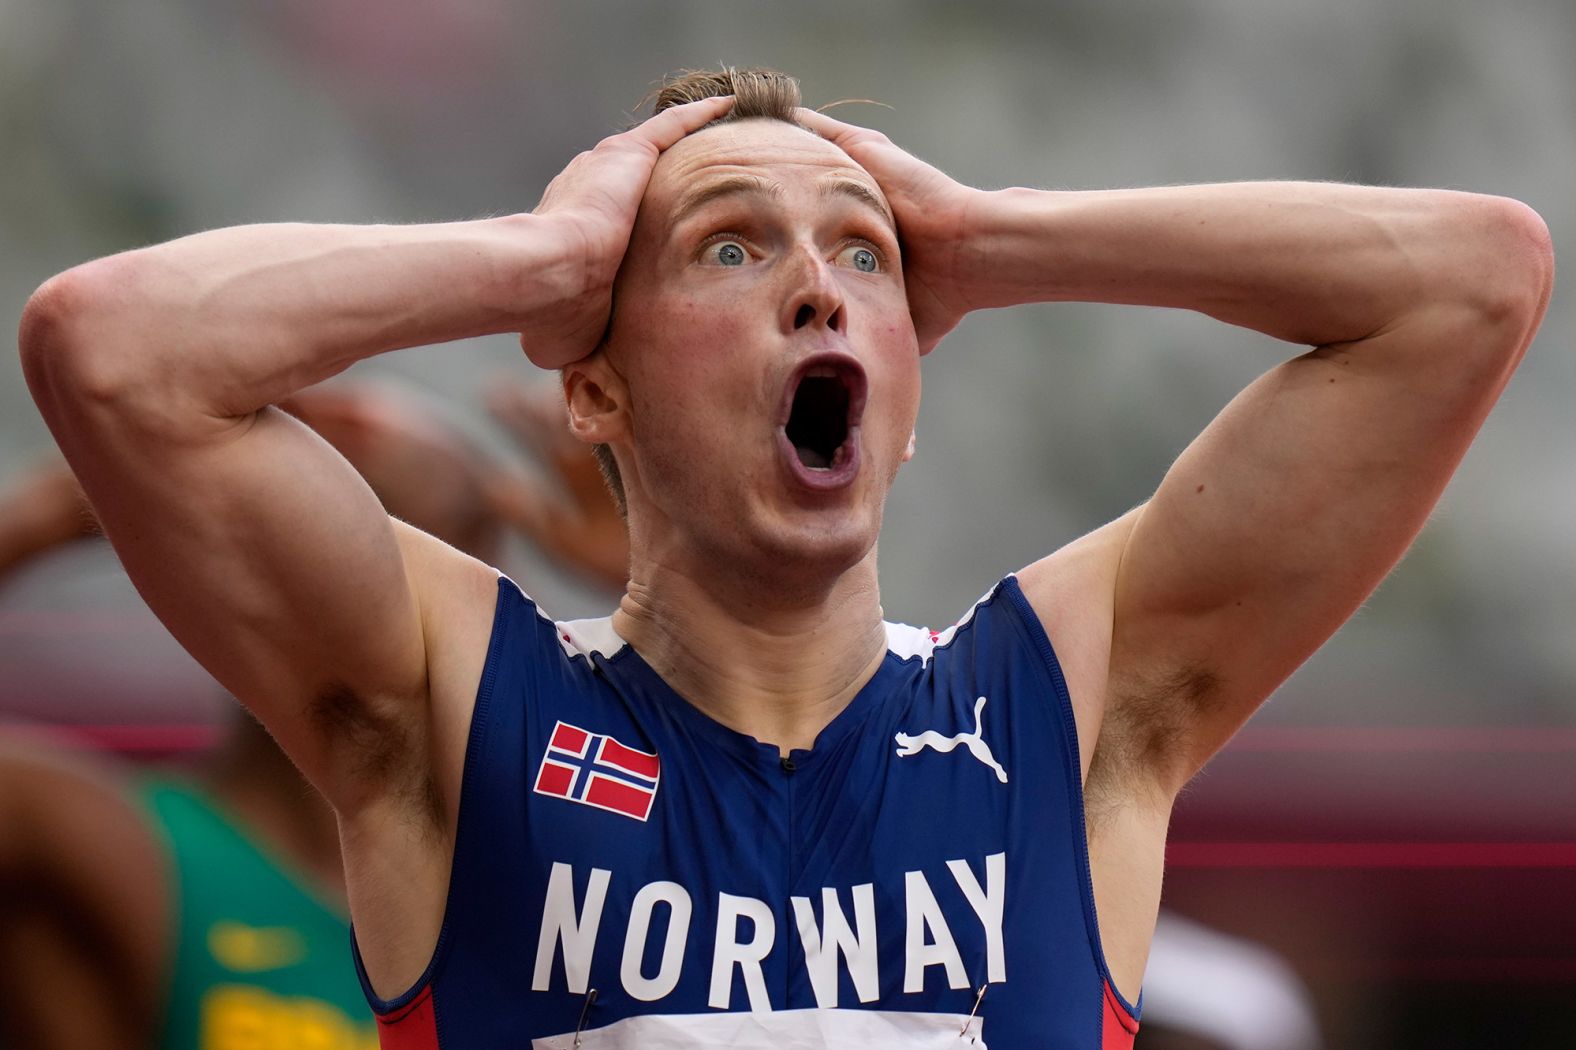 Norway's Karsten Warholm celebrates after winning gold in the 400-meter hurdles on August 3. Warholm finished the race in 45.94 seconds, <a href="index.php?page=&url=https%3A%2F%2Fwww.cnn.com%2Fworld%2Flive-news%2Ftokyo-2020-olympics-08-02-21-spt%2Fh_c575aefe40b0453a64105030fdda4b1c" target="_blank">breaking his own world record.</a>